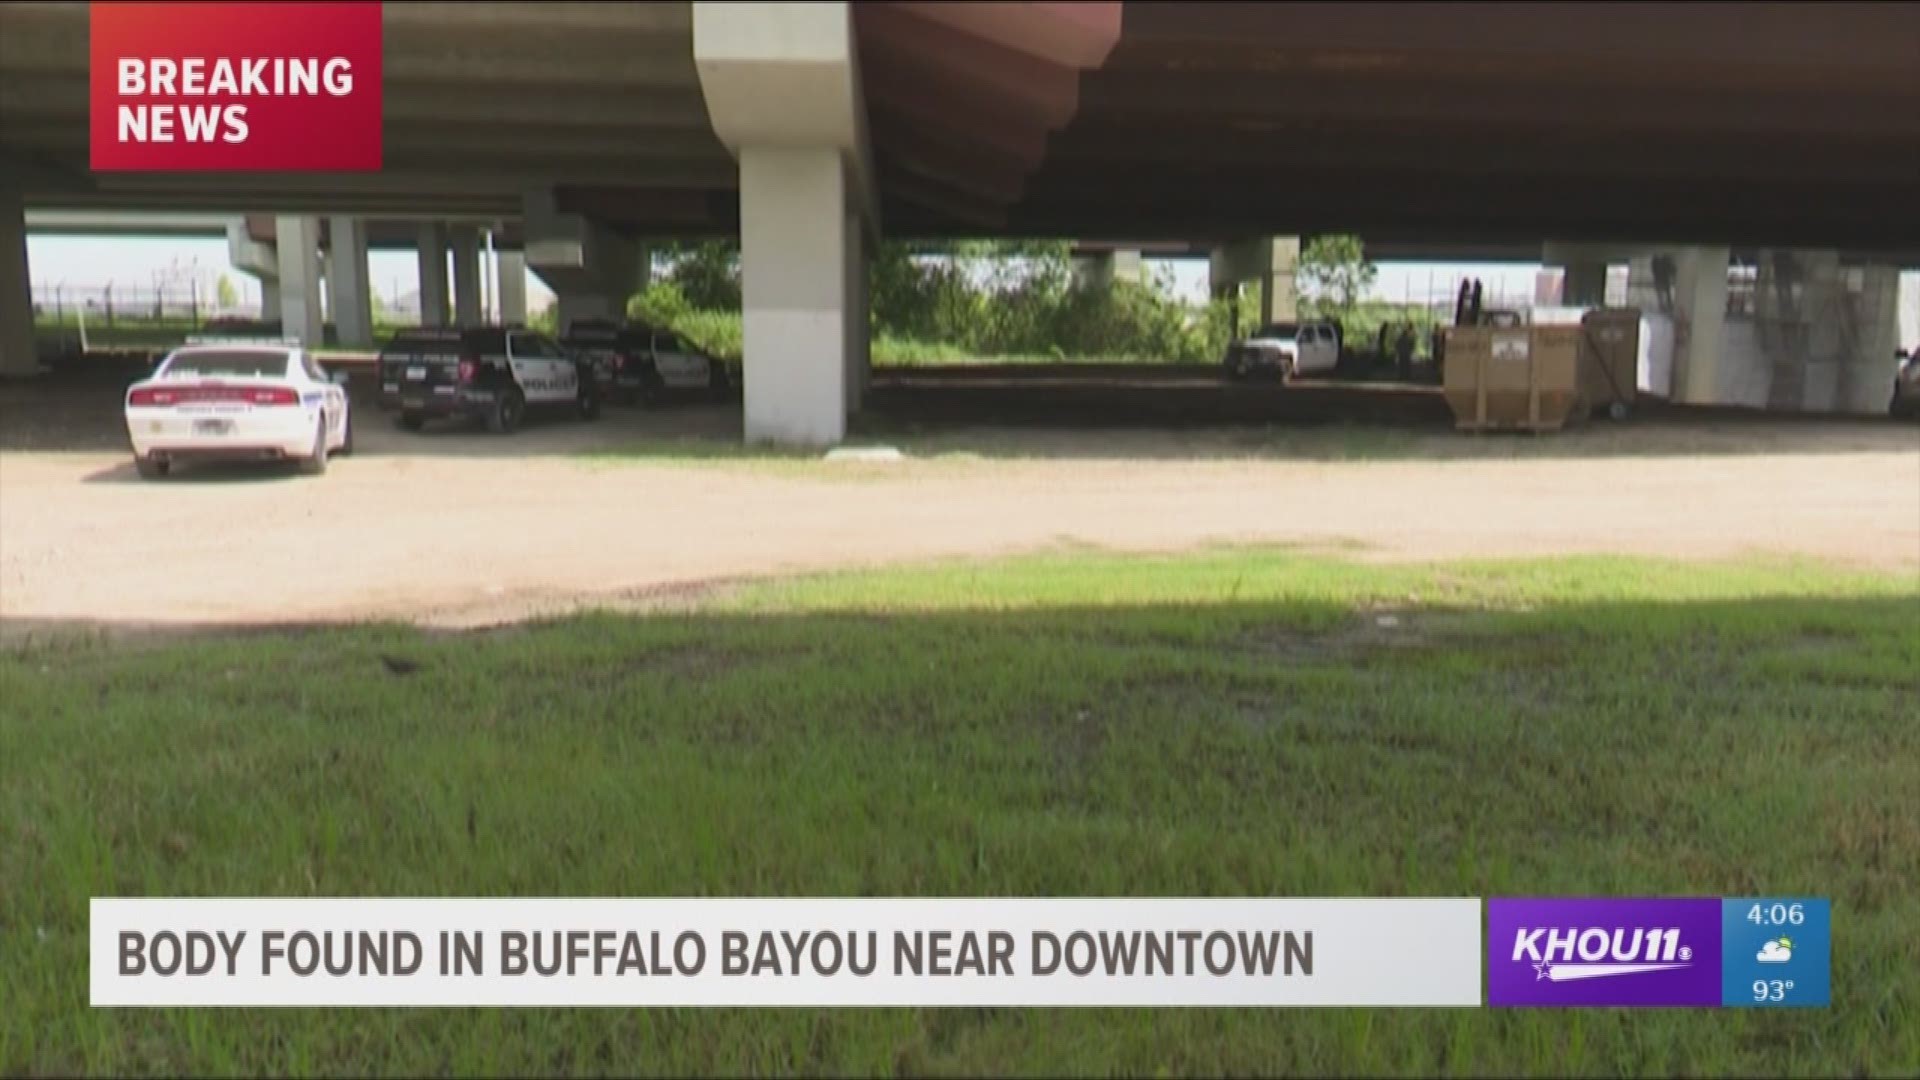 A man's body has been found in Buffalo Bayou. The body was discovered under the Eastex Freeway just northeast of downtown Houston. 